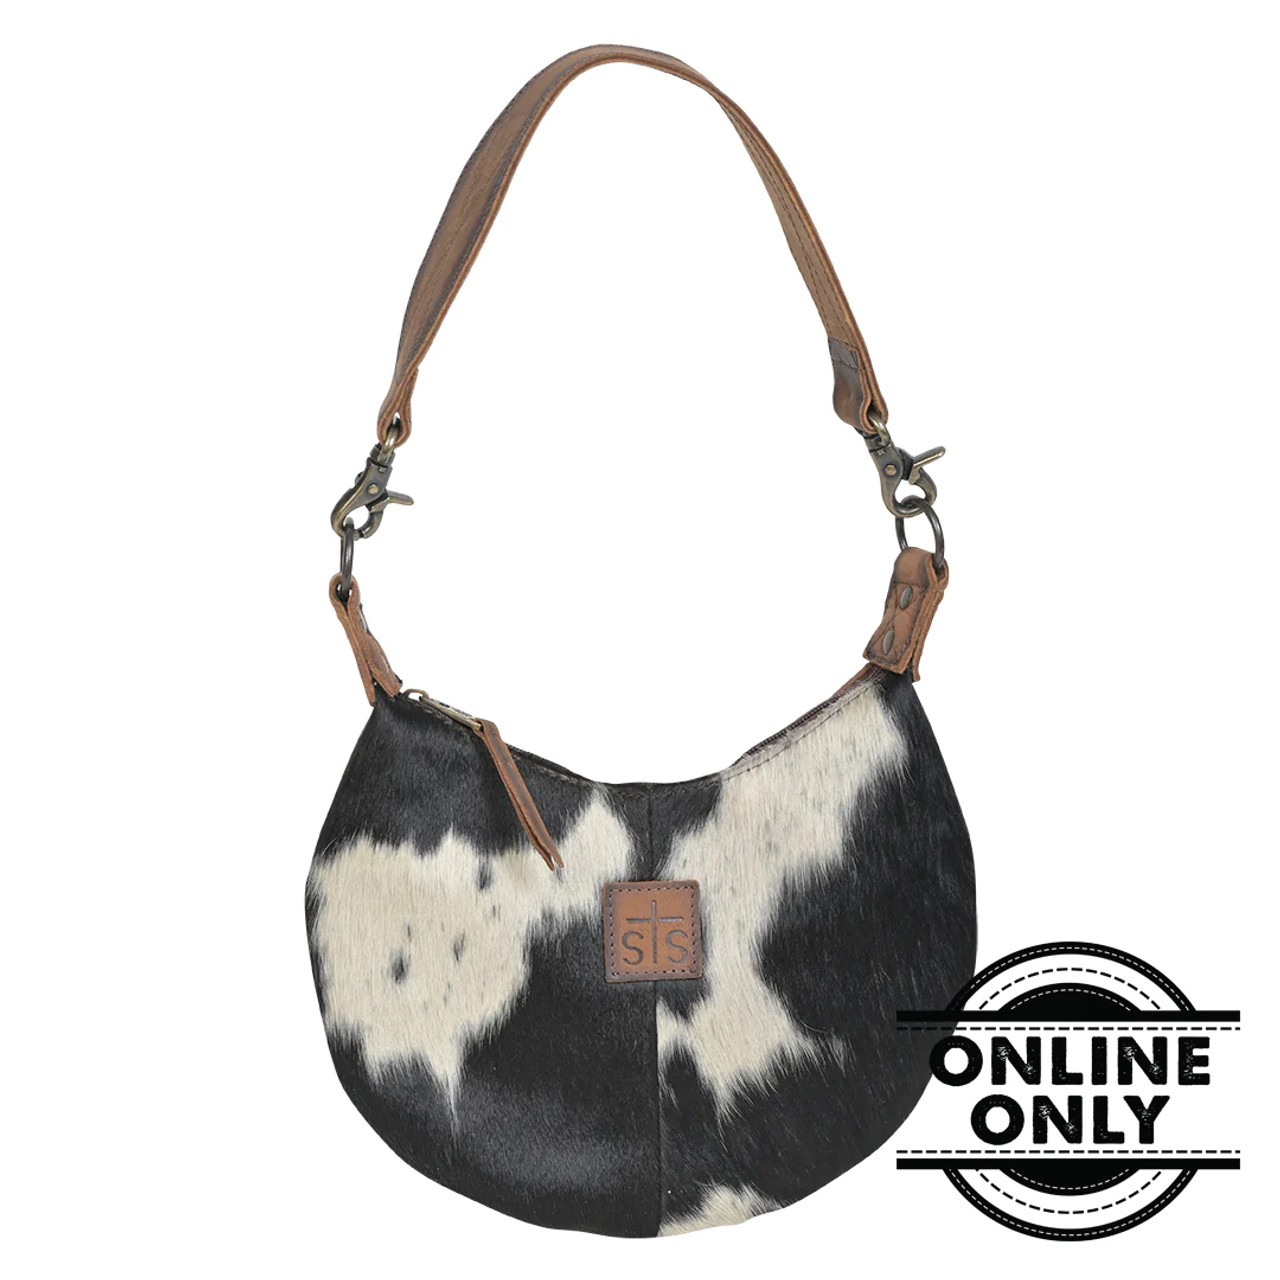 Leather Bag Accessories, Cowhide Bag Accessories